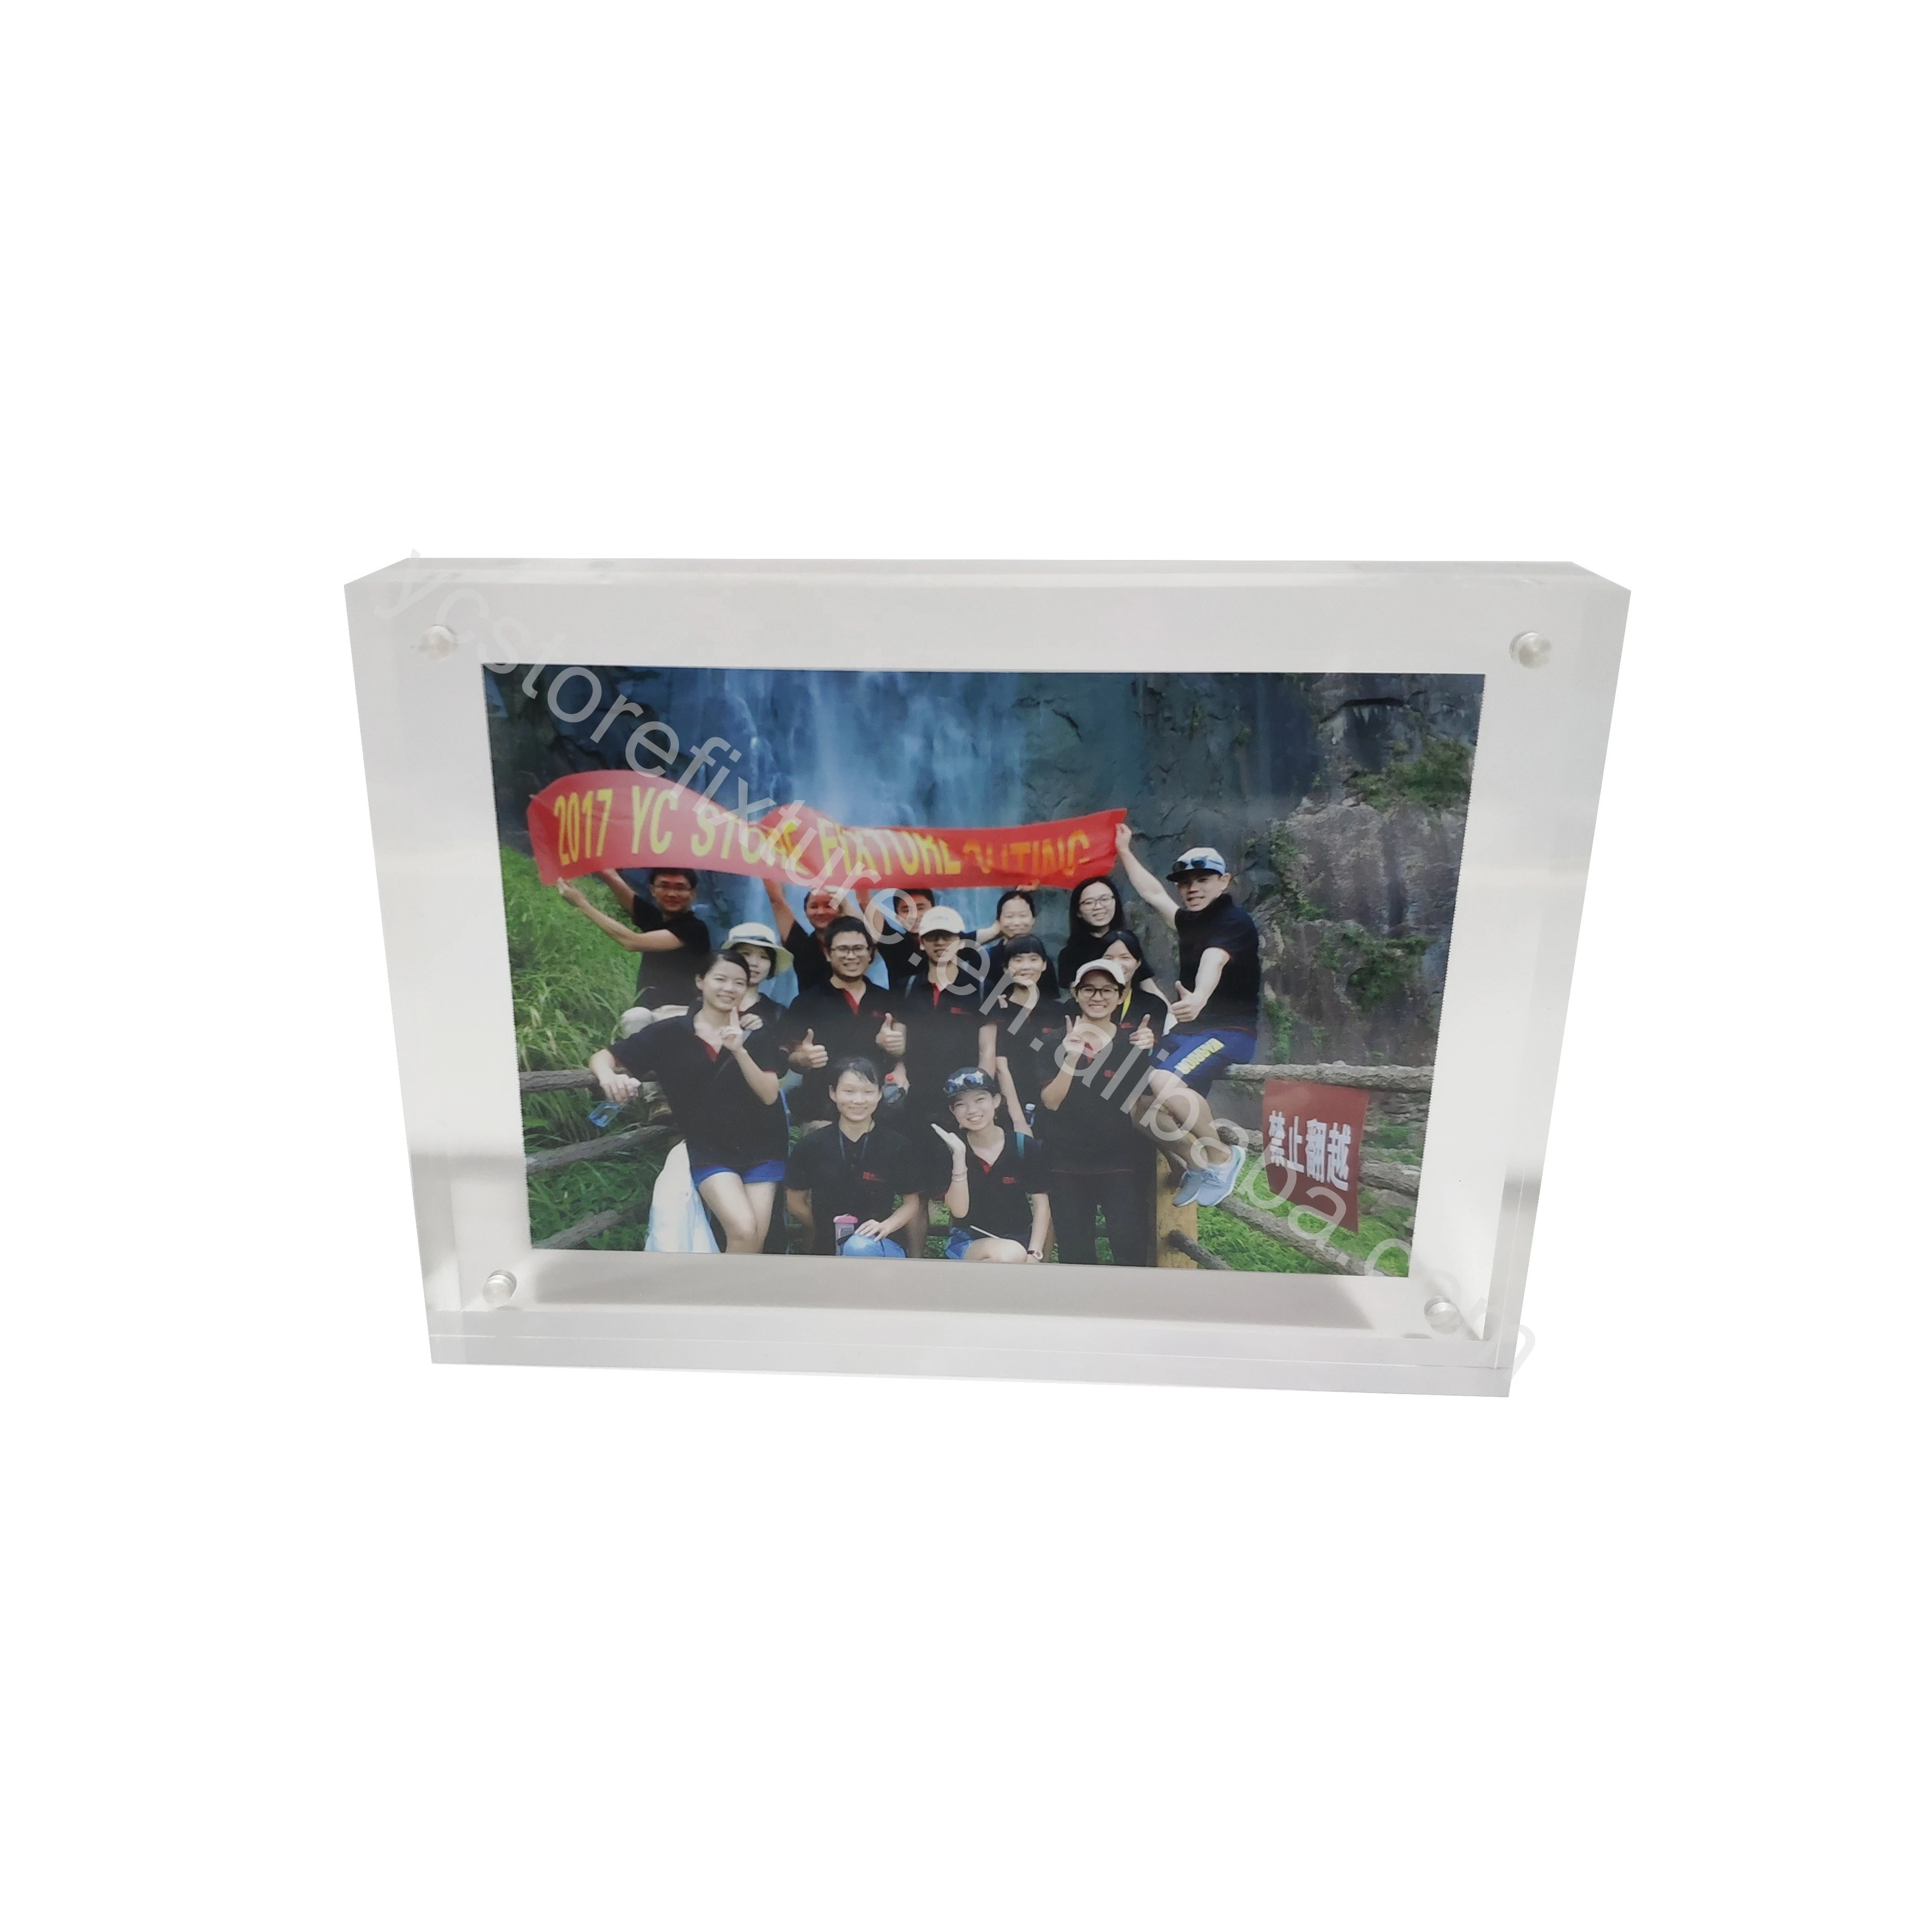 Clear Acrylic Photo Frame with Magnets